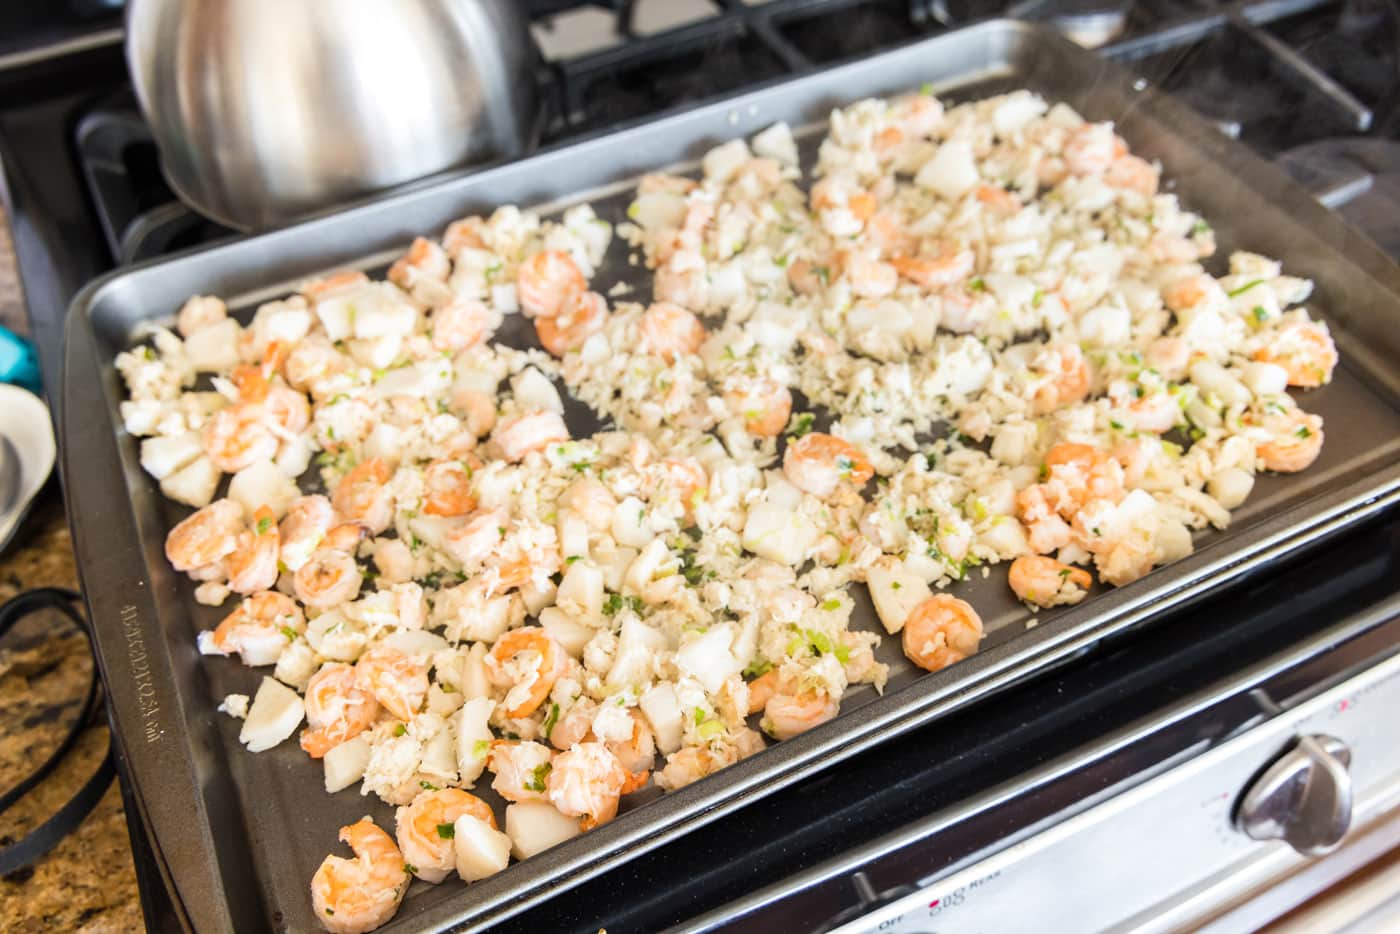 crab meat, scallops, and shrimp on a baking tray